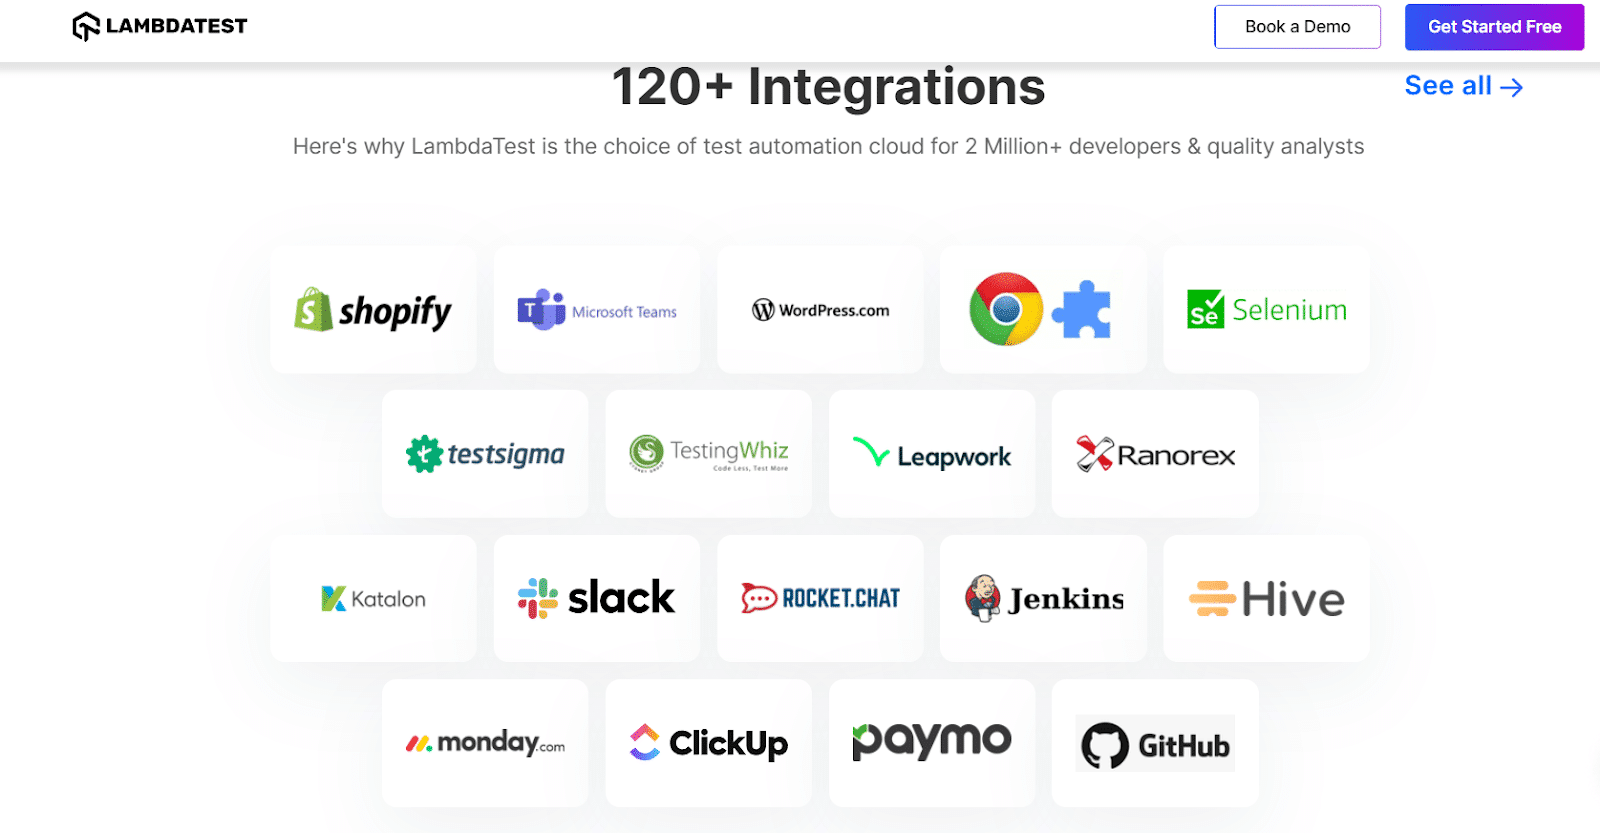 Lambda Test integrates up to more than 120 integrations
